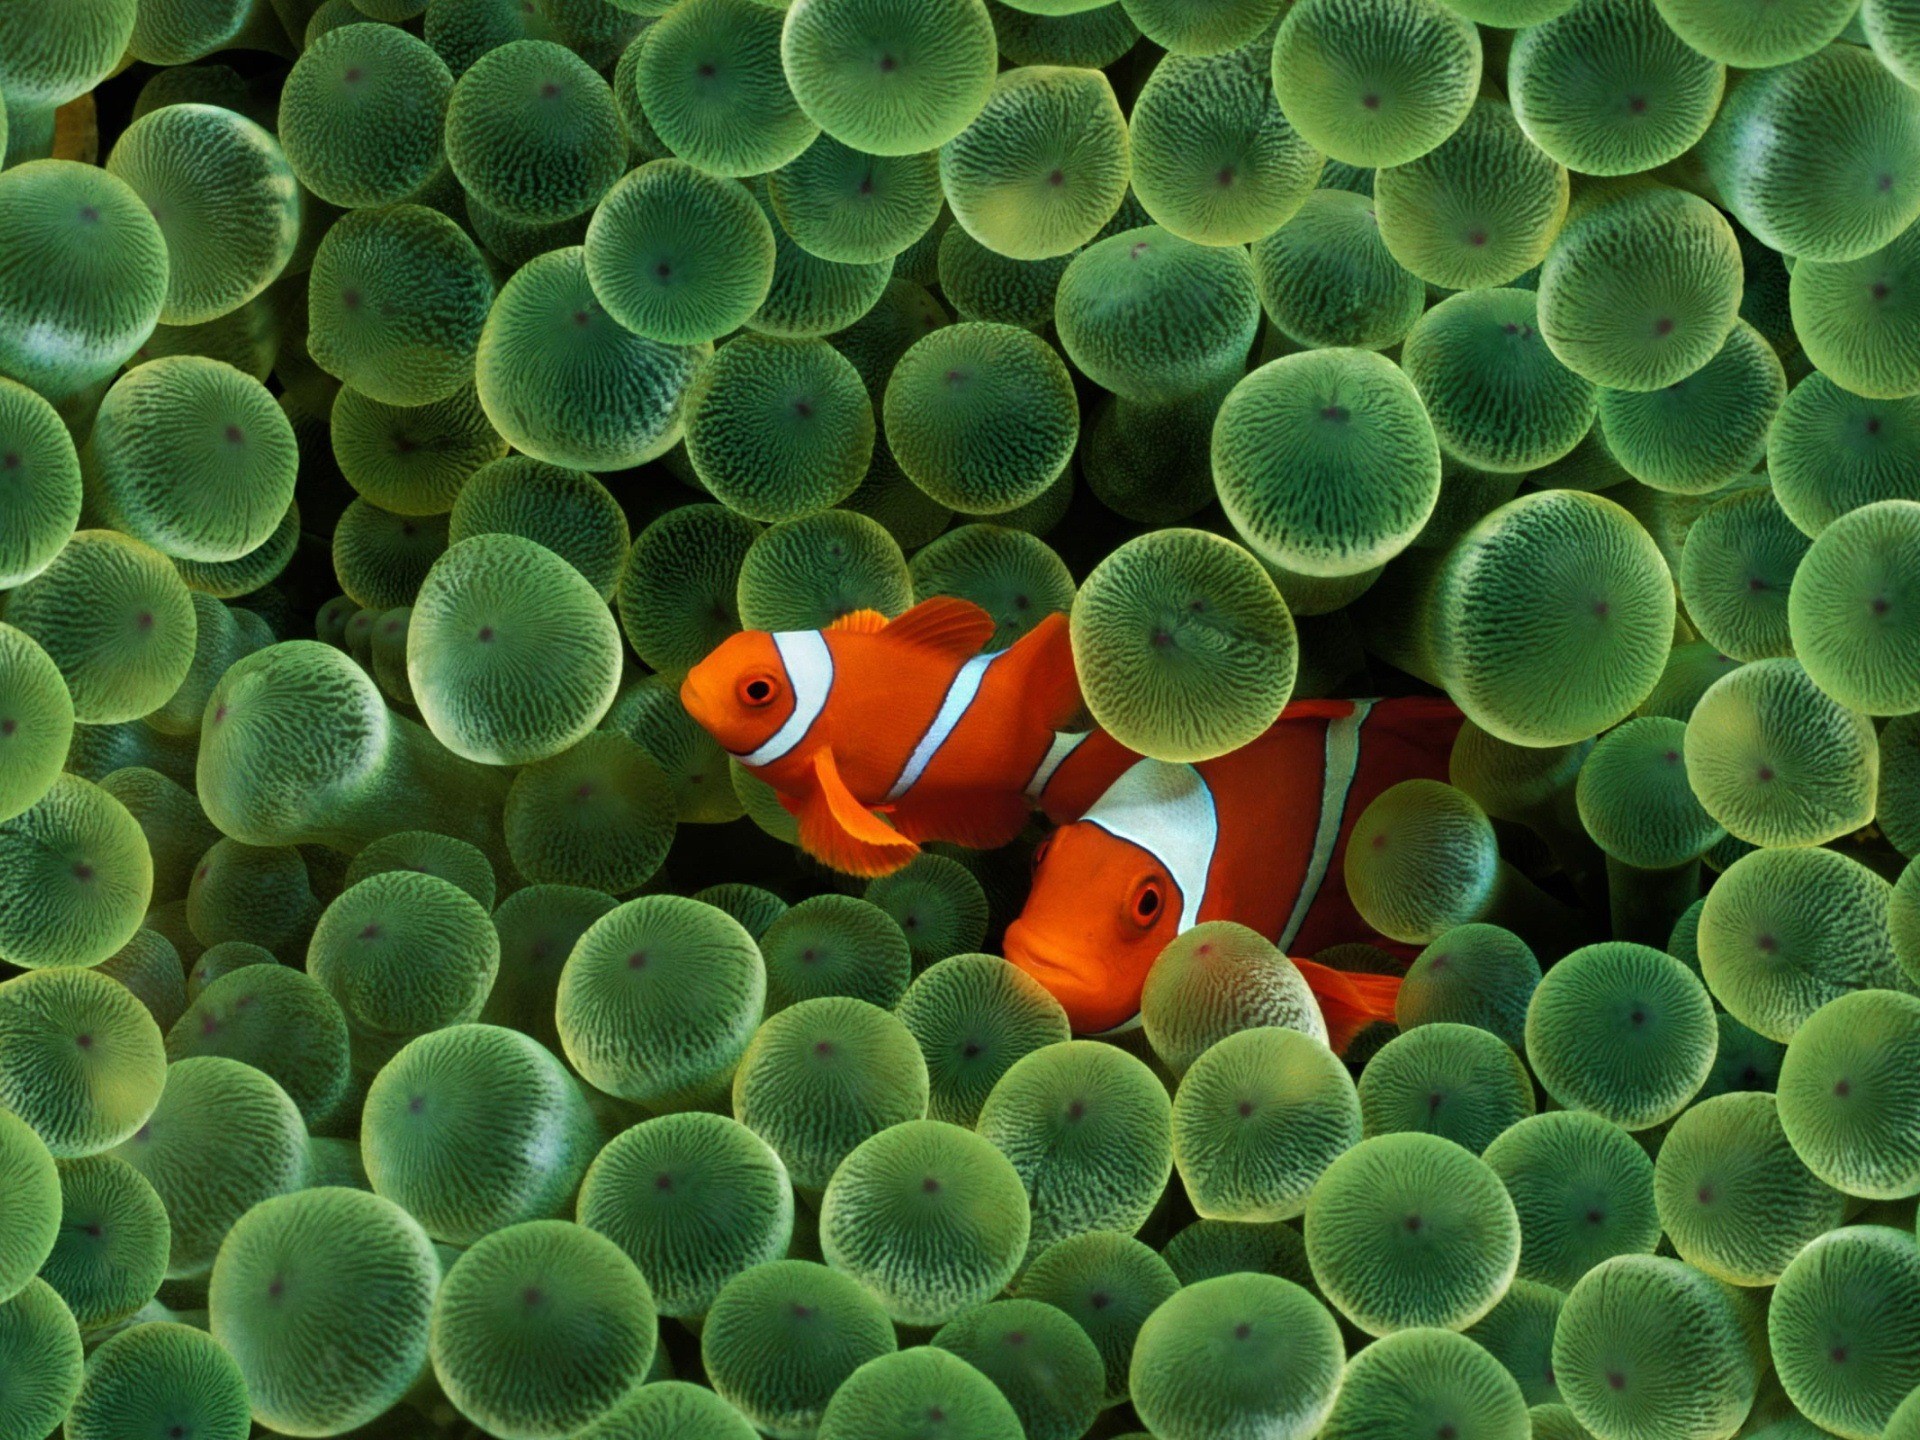 Clown fish in the undergrowth of tropical underwater plants